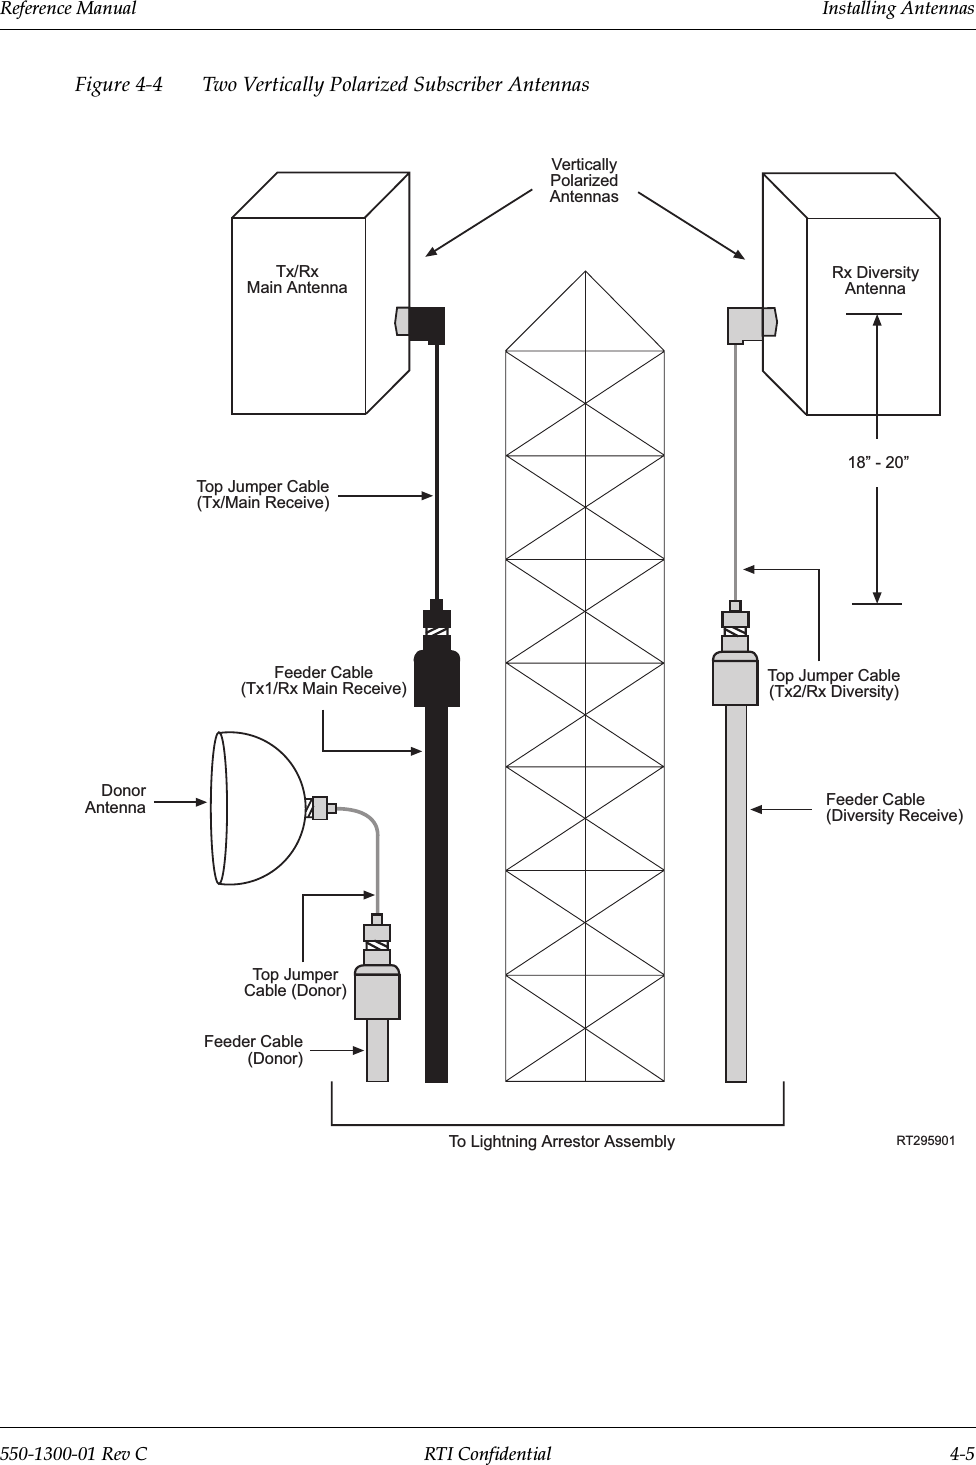 Reference Manual     Installing Antennas550-1300-01 Rev C RTI Confidential 4-5Figure 4-4 Two Vertically Polarized Subscriber AntennasTo Lightning Arrestor AssemblyFeeder Cable(Donor)Top JumperCable (Donor)DonorAntennaFeeder Cable(Tx1/Rx Main Receive)Top Jumper Cable(Tx/Main Receive)Tx/RxMain AntennaVerticallyPolarizedAntennasRx DiversityAntenna18 - 20Top Jumper Cable(Tx2/Rx Diversity)Feeder Cable(Diversity Receive)RT295901